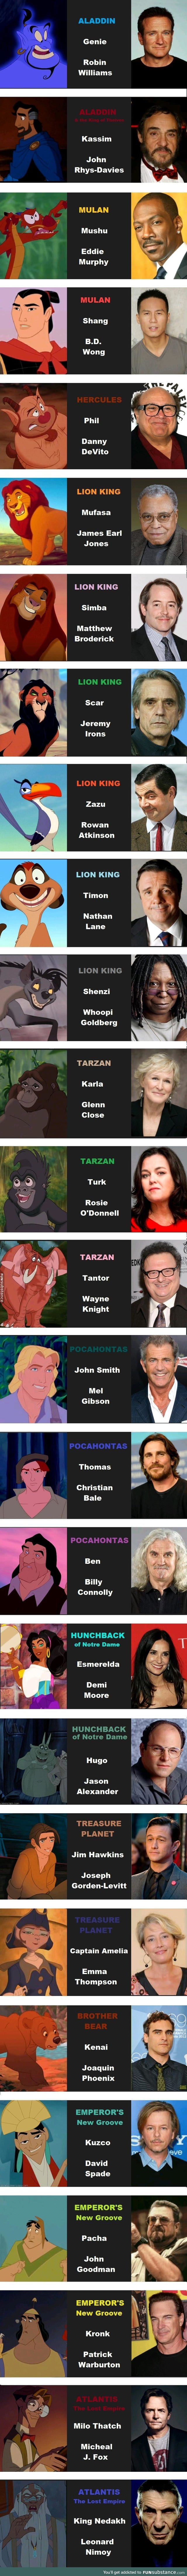 Some of the famous faces behind Disney characters